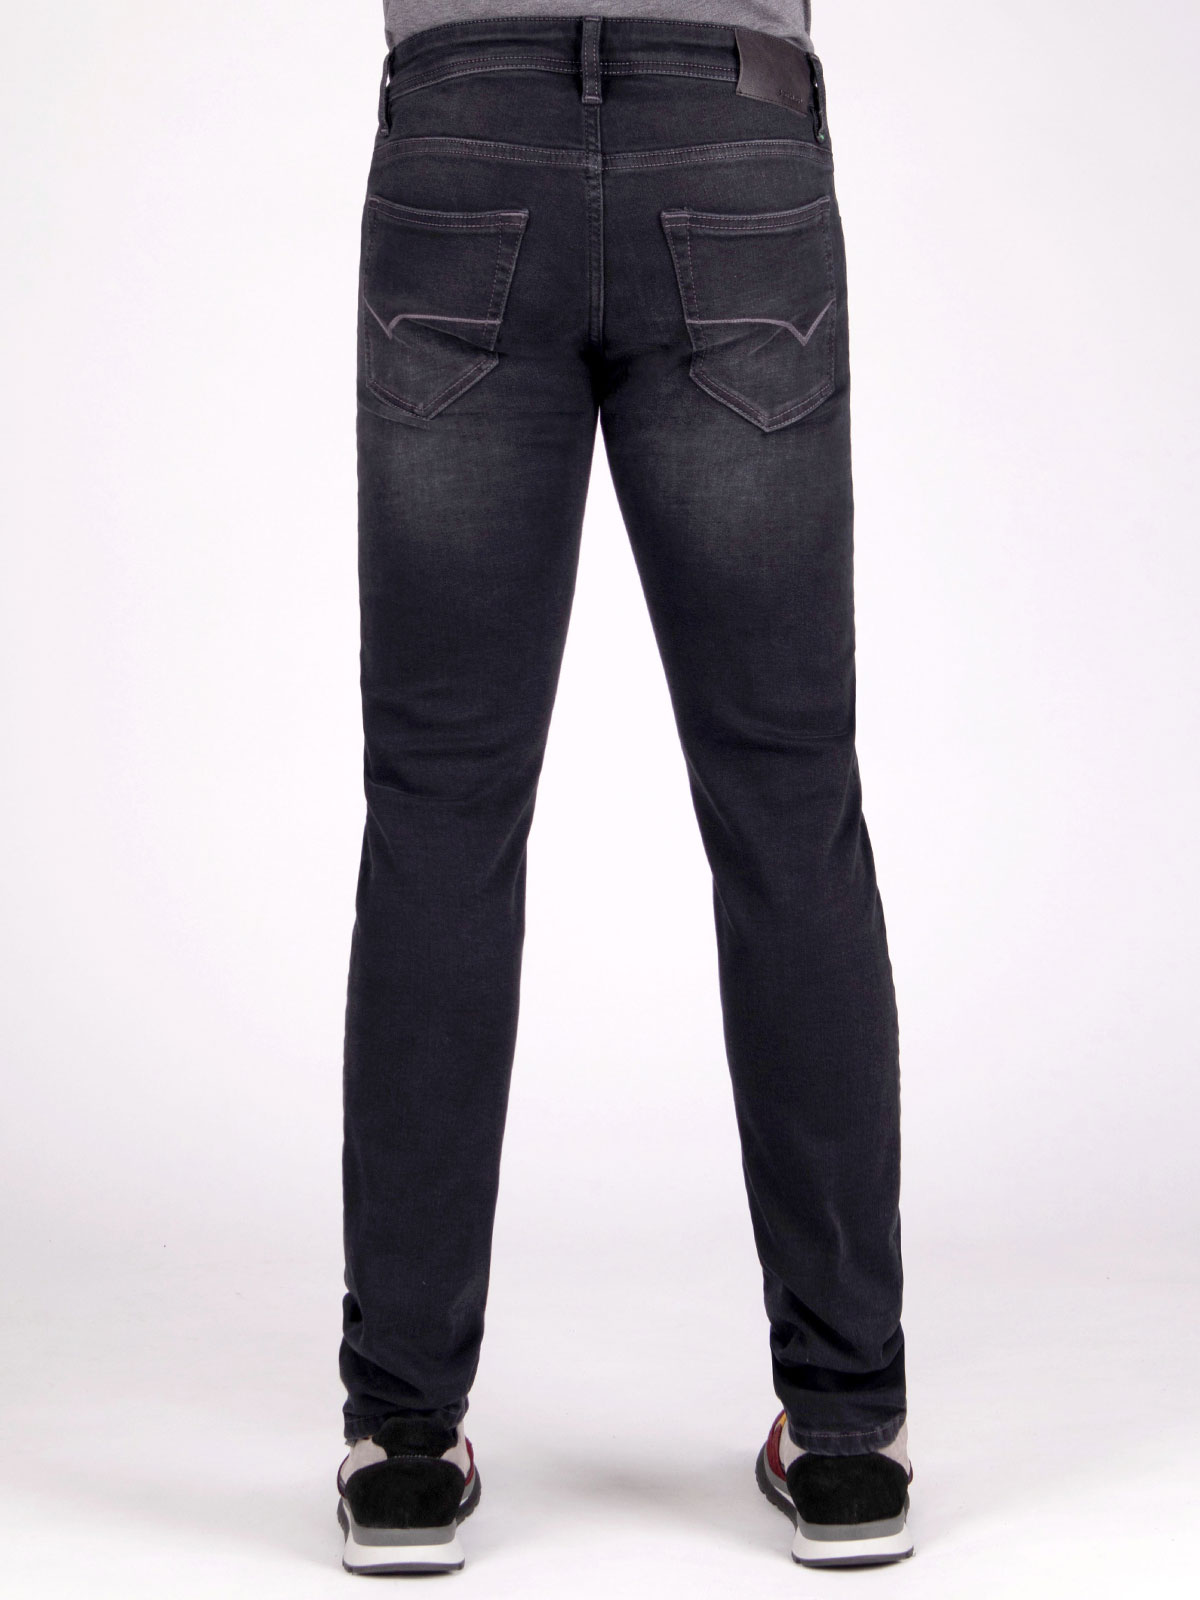 Black fitted jeans with elastane - 62140 € 30.93 img4